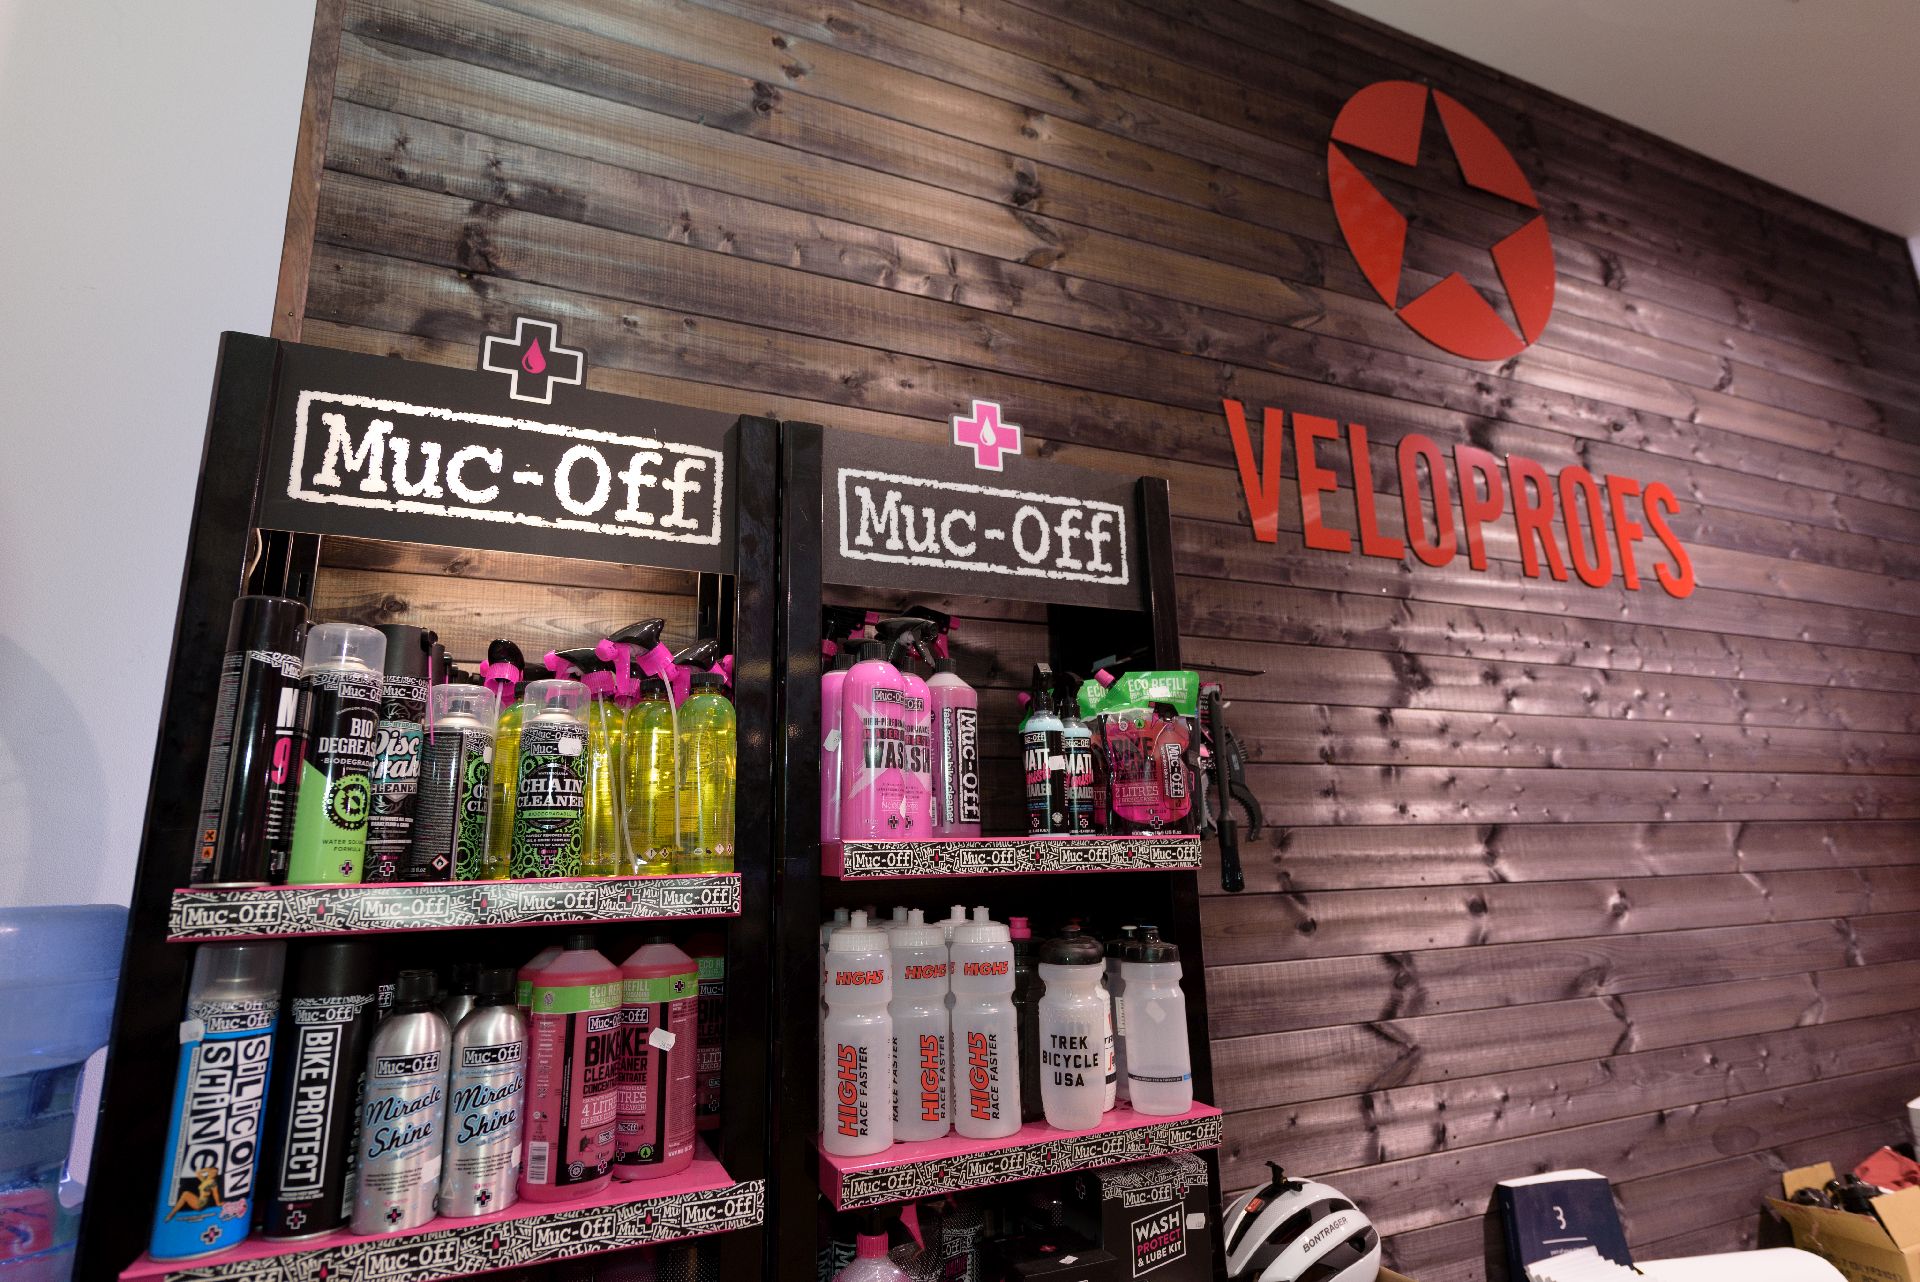 Muc-Off bicycle products